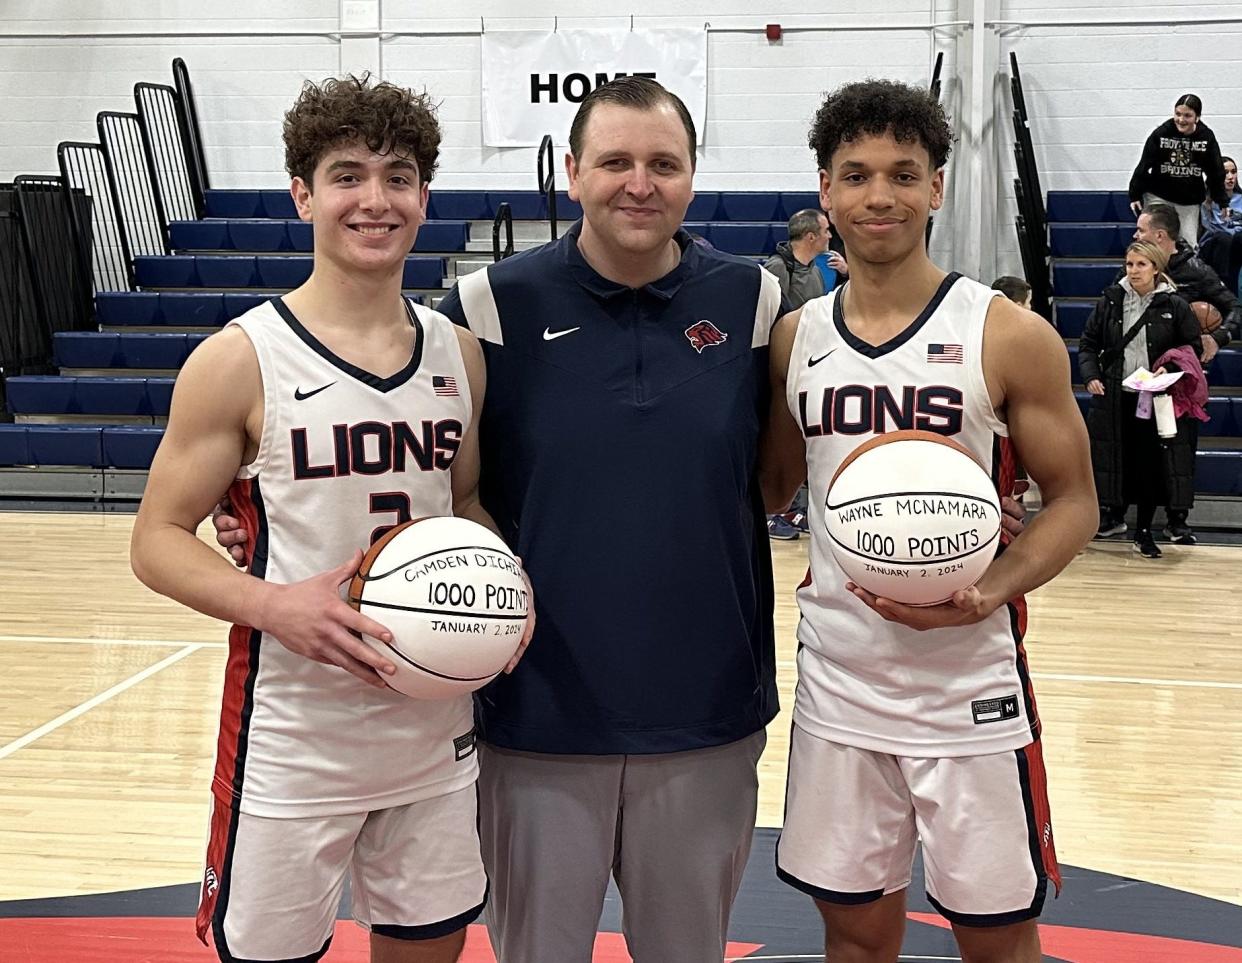 From left, Cam DiChiara, coach Jeremy Wilner, and Wayne McNamara after Tuesday's win over PCD. Both players reached the 1,000 point milestone in their Lincoln careers.